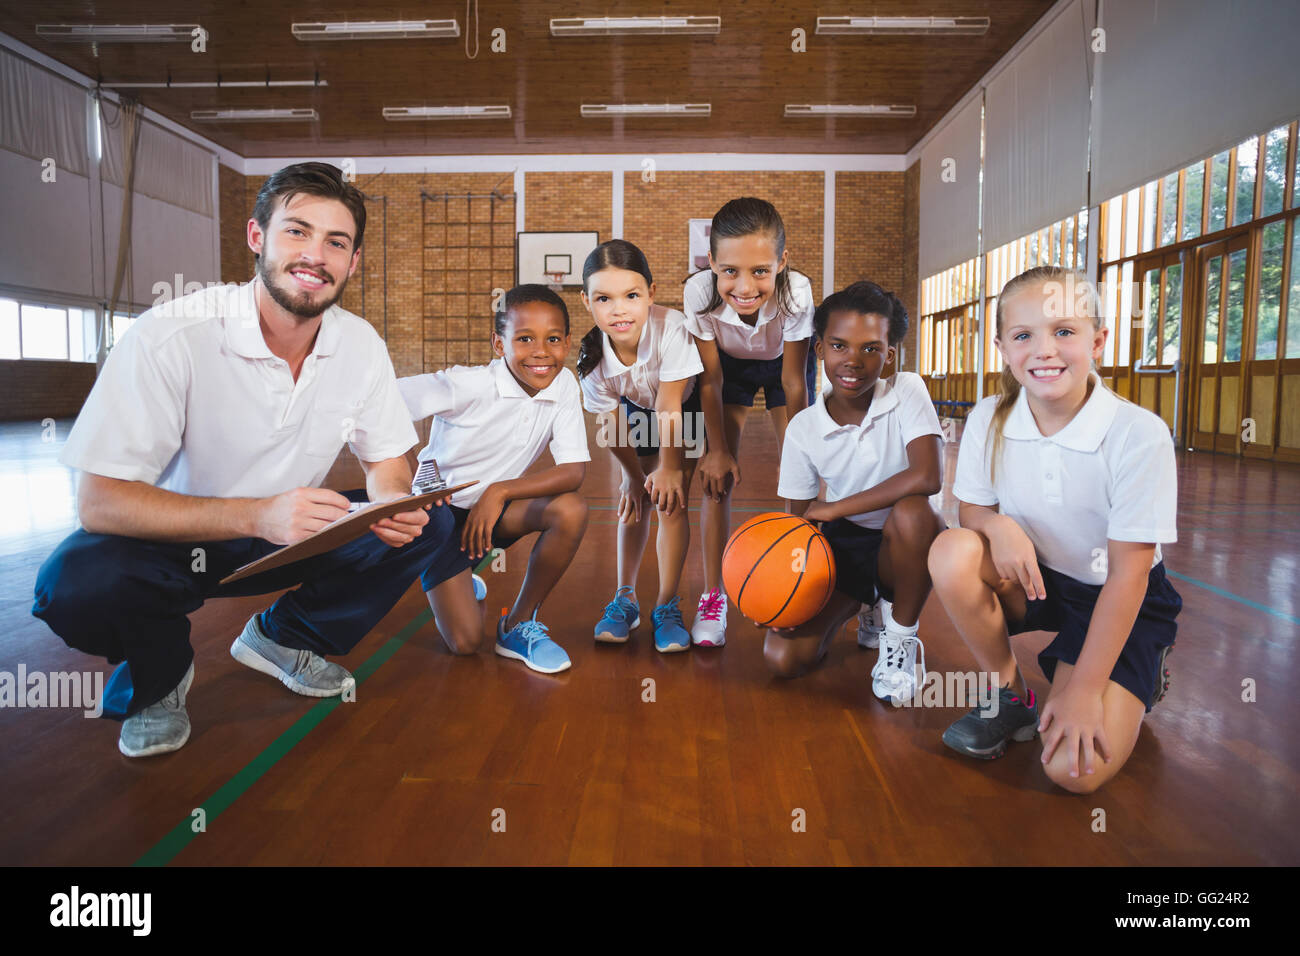 Portrait of sports teacher and school kids in basketball court Stock Photo